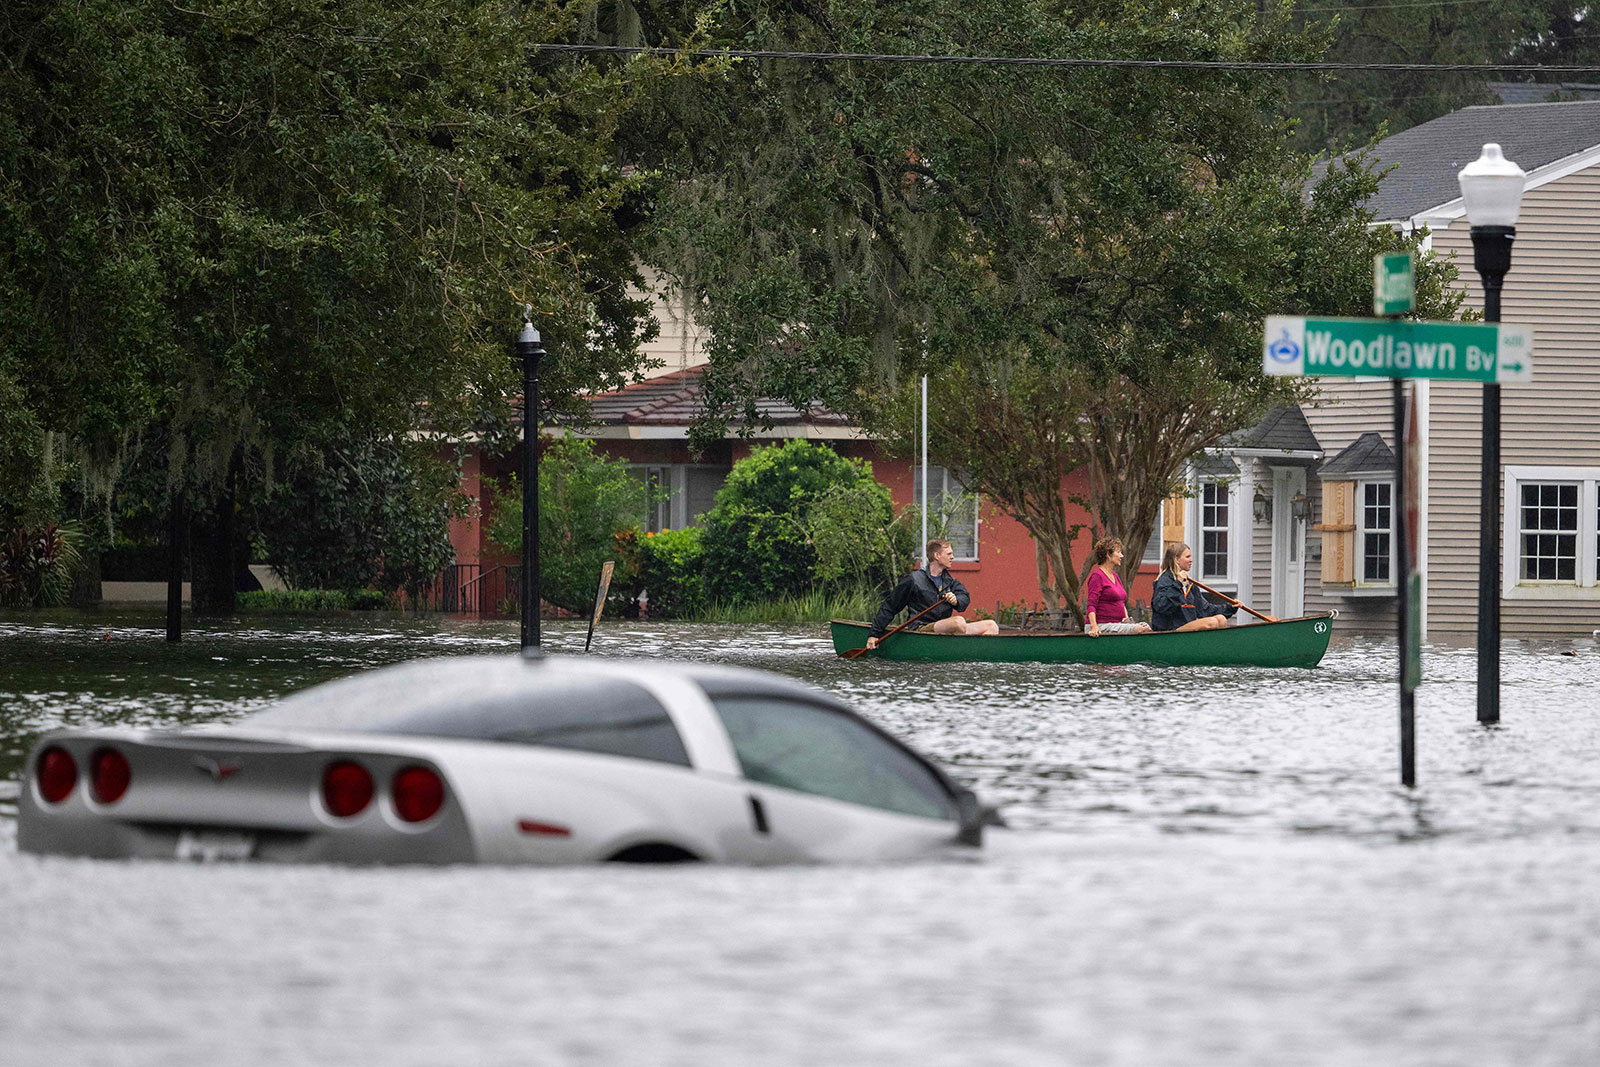 People paddle in a canoe near a submerged vehicle in Orlando, Florida on Thursday.